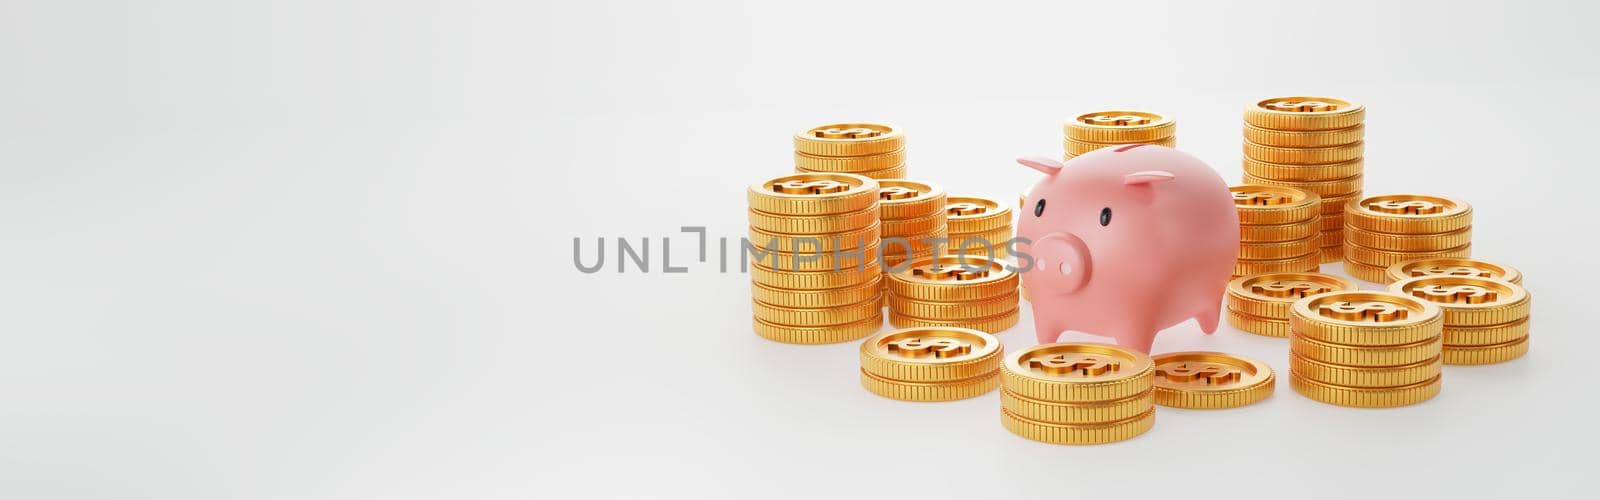 Piggy bank with gold coin on isolated white background. Panorama wide angle cover banner with copy space on left side. Money saving and business economic investment concept. 3D illustration rendering